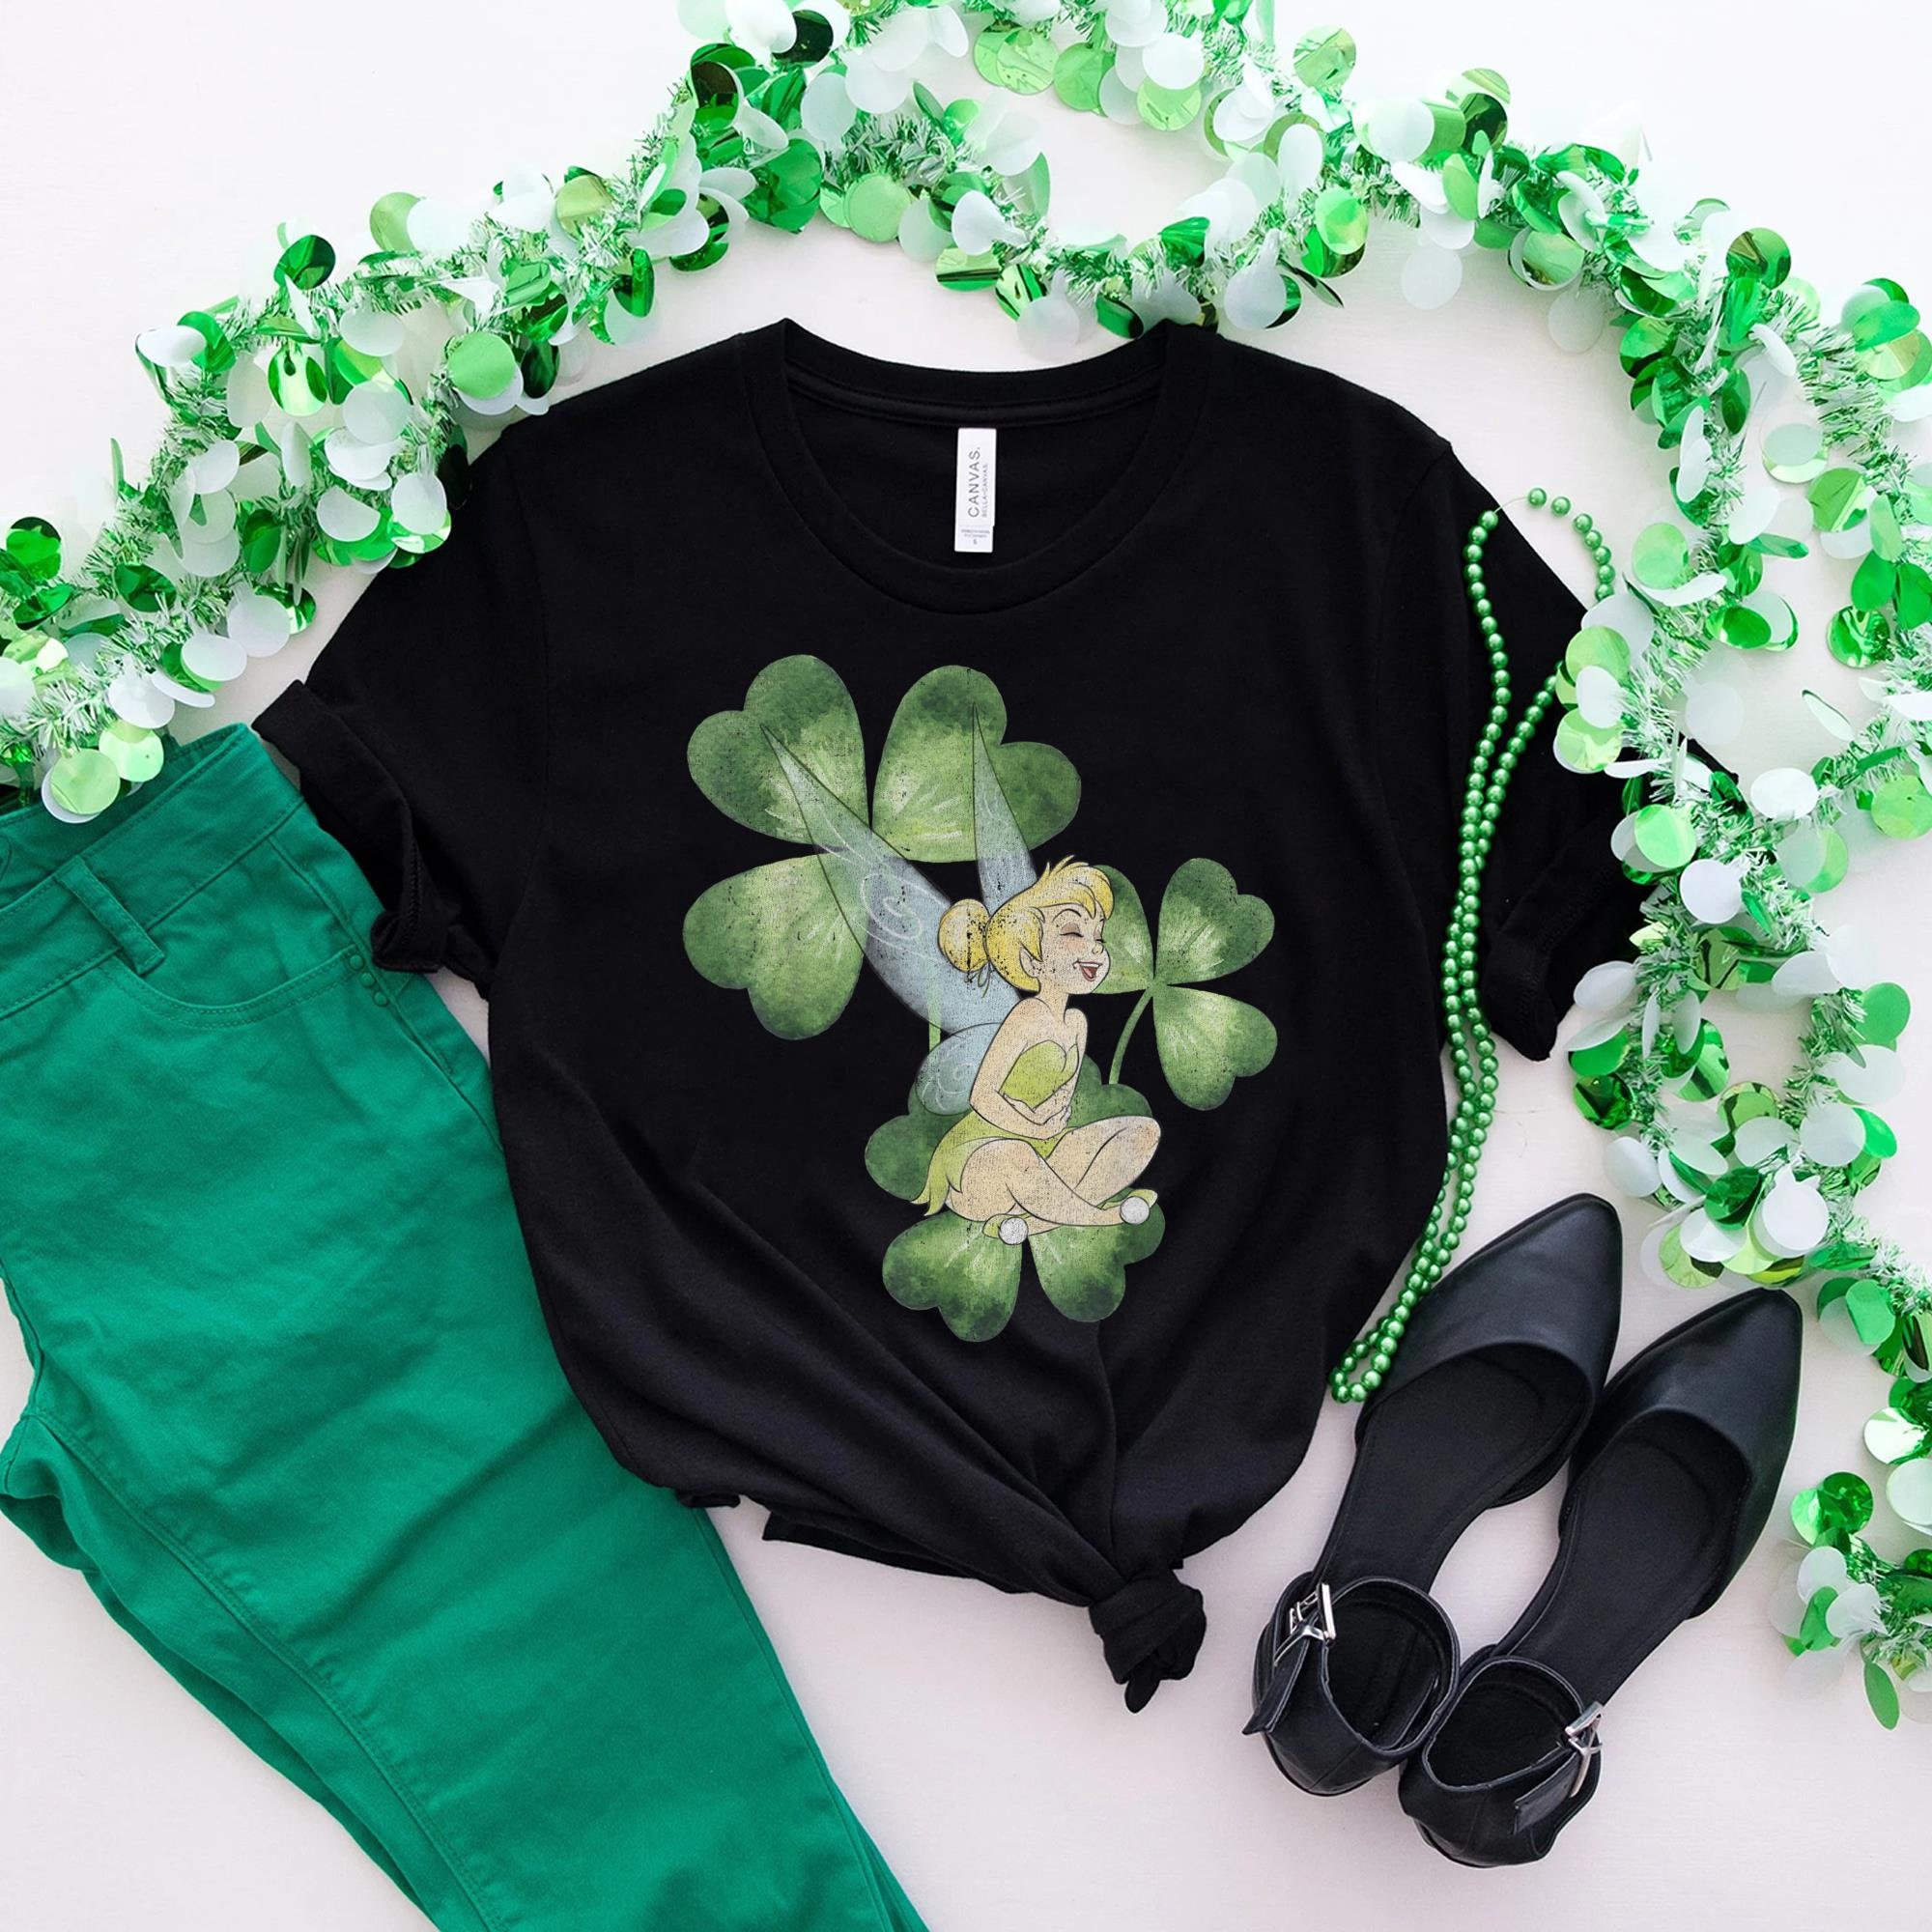 Discover Peter Pan Tinker Bell Clover Shamrock St. Patrick's Day Tshirt